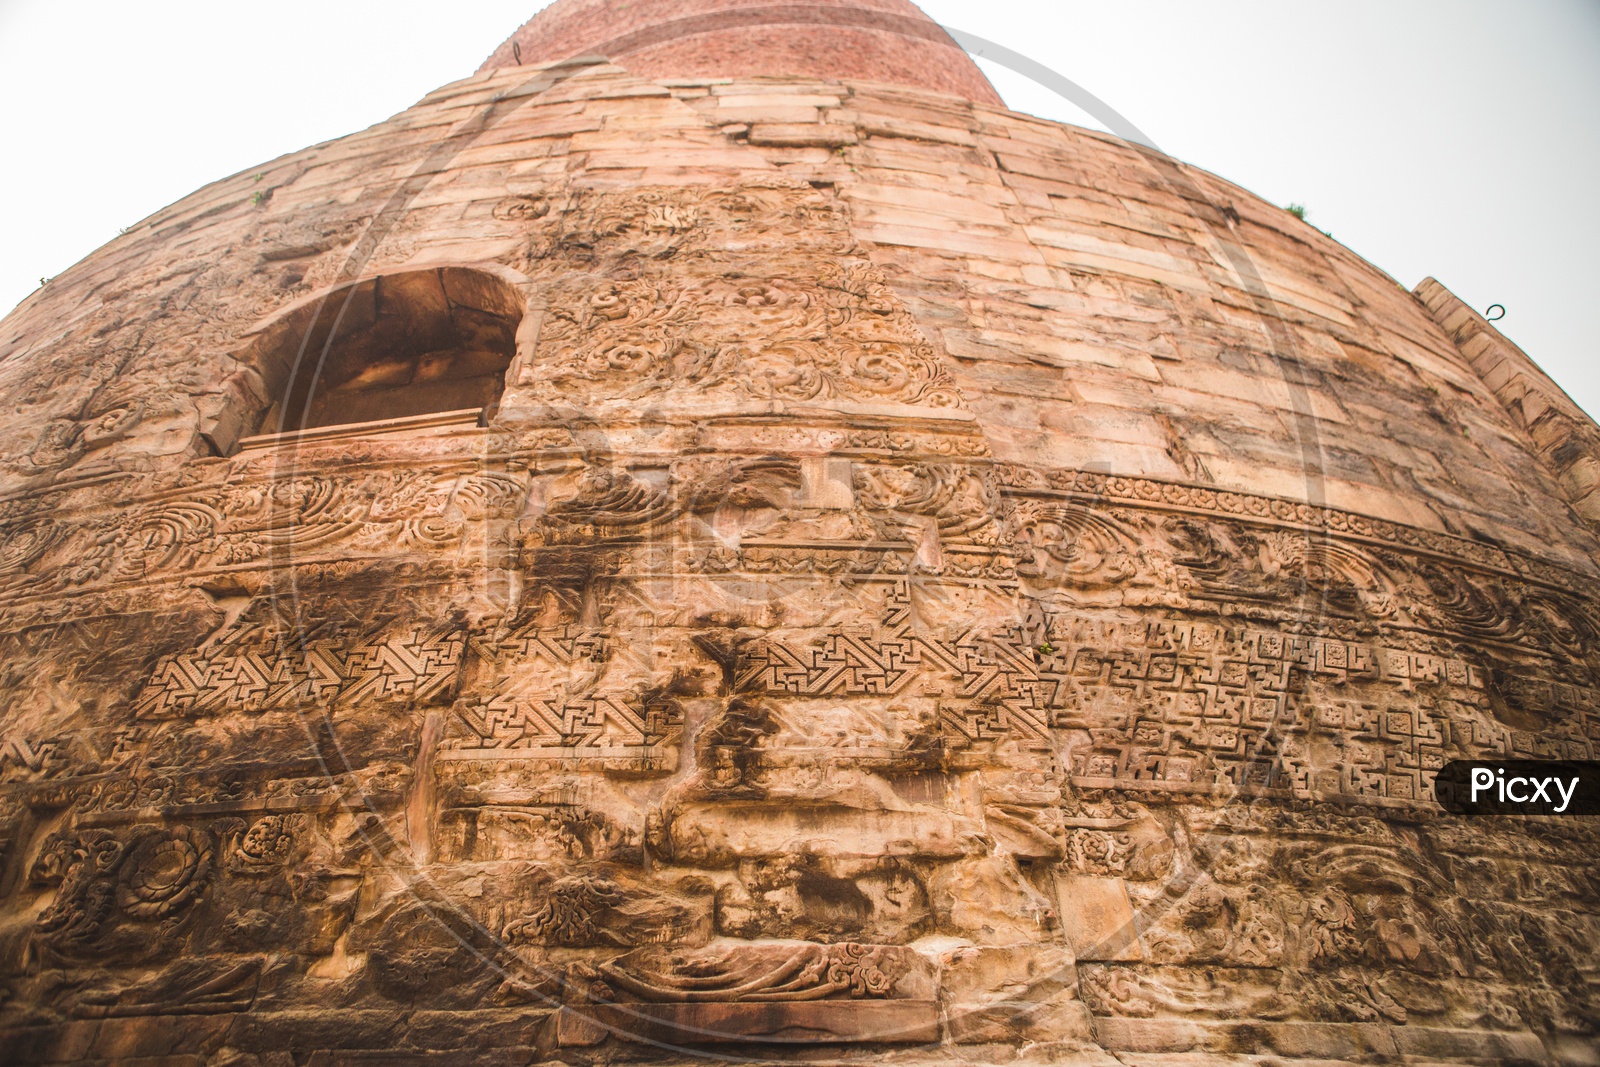 Carvings on the stupa